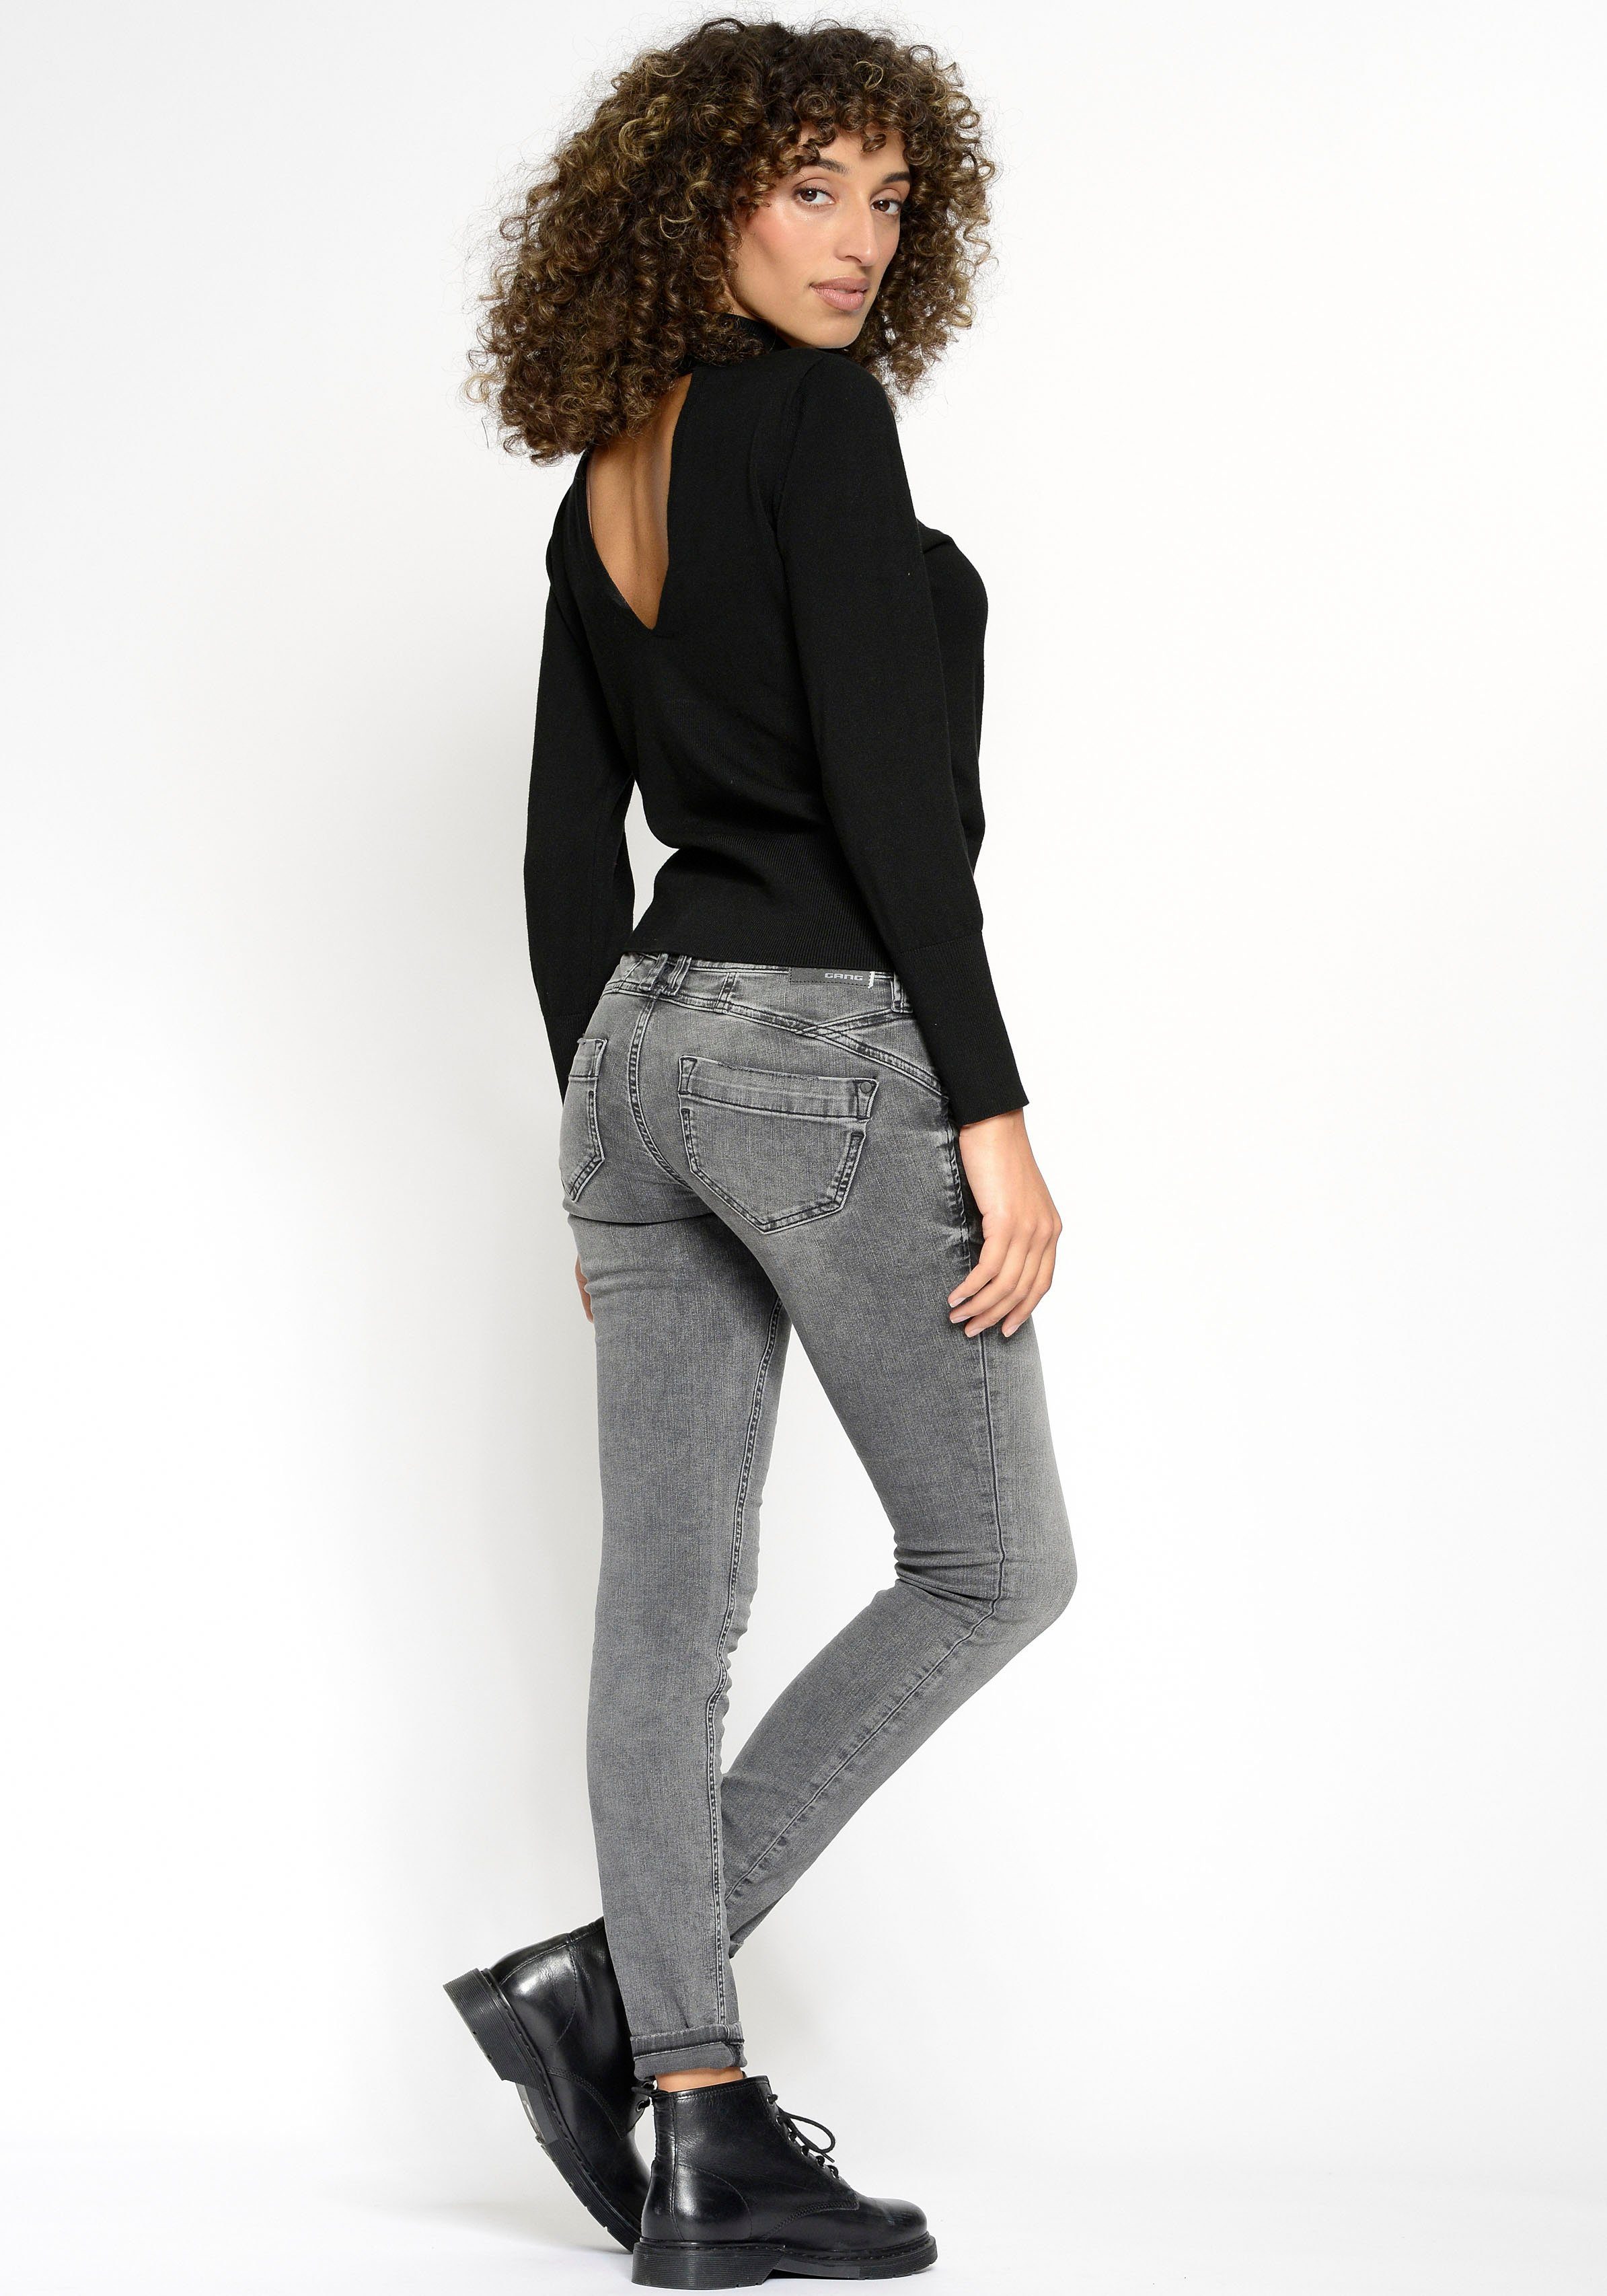 authenischer Used-Waschung GANG in Skinny-fit-Jeans black 94Nena abrasion